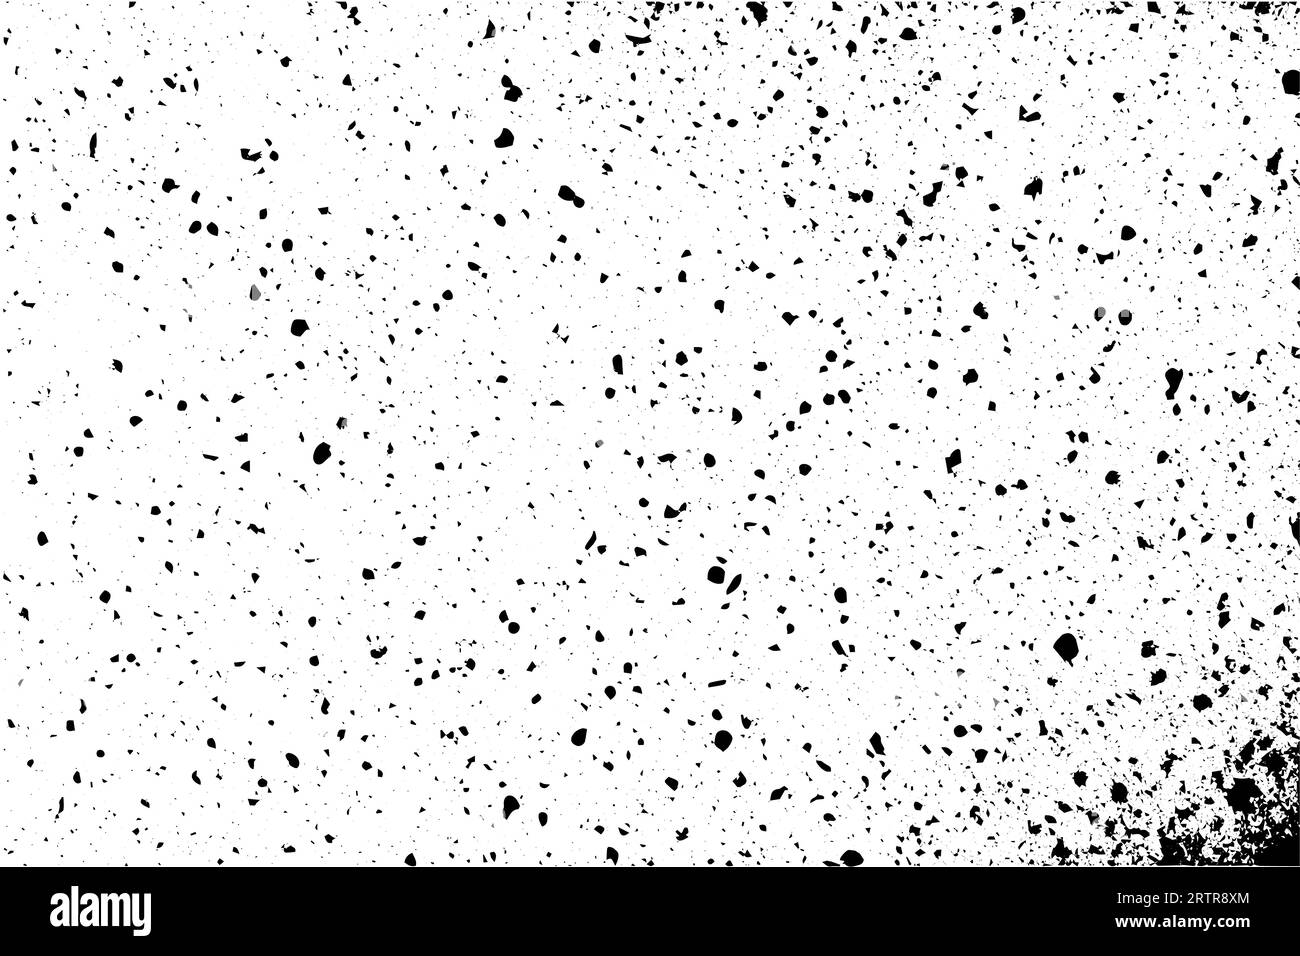 Gritty gravel texture. Gradient halftone overlay backdrop. Monochrome abstract splattered design vector background. Stock Vector